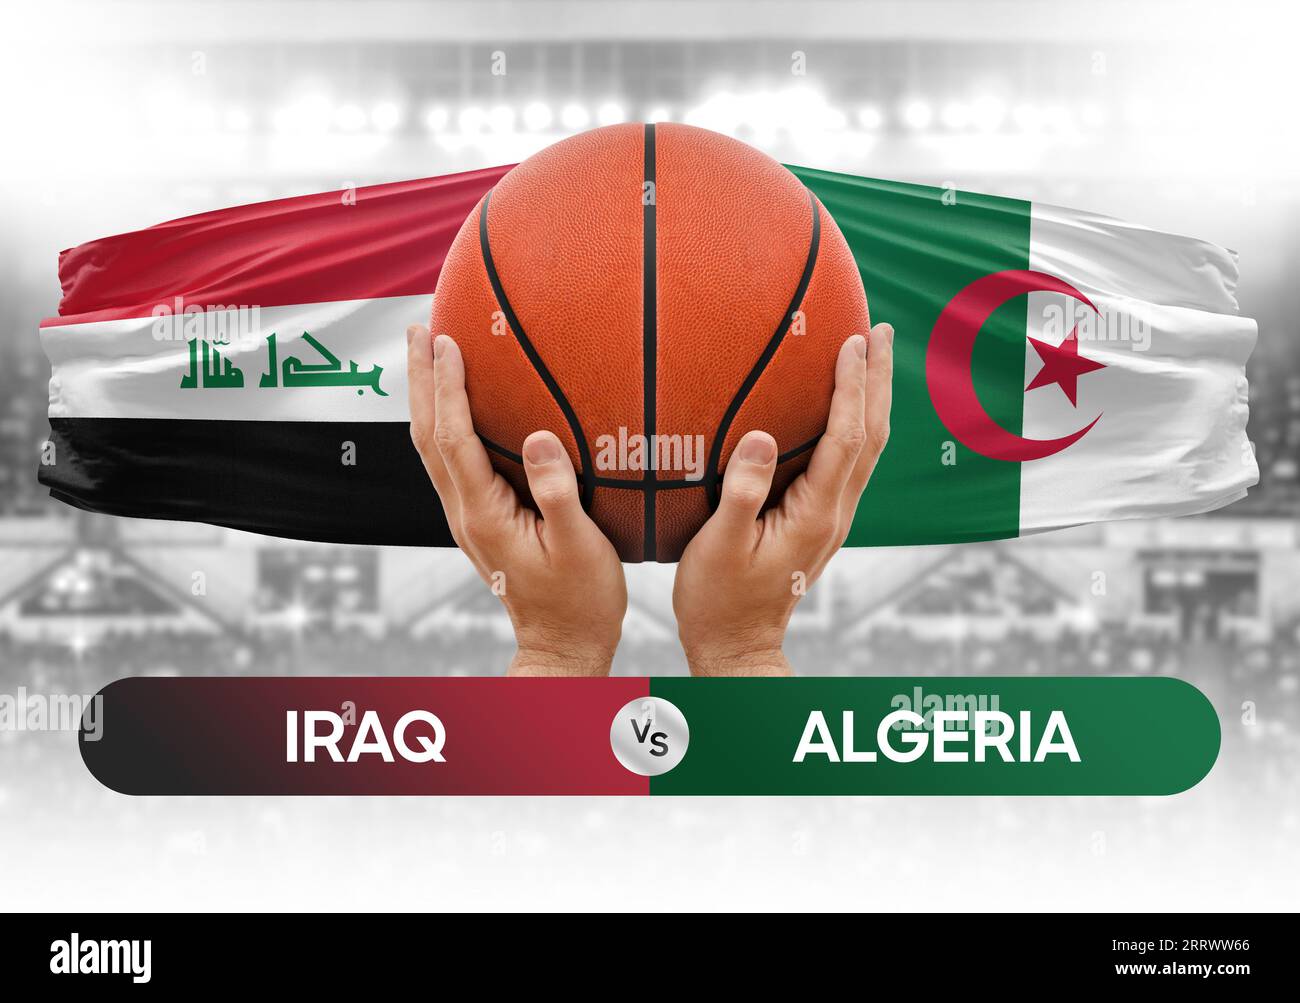 Iraq vs Algeria national basketball teams basket ball match competition cup concept image Stock Photo